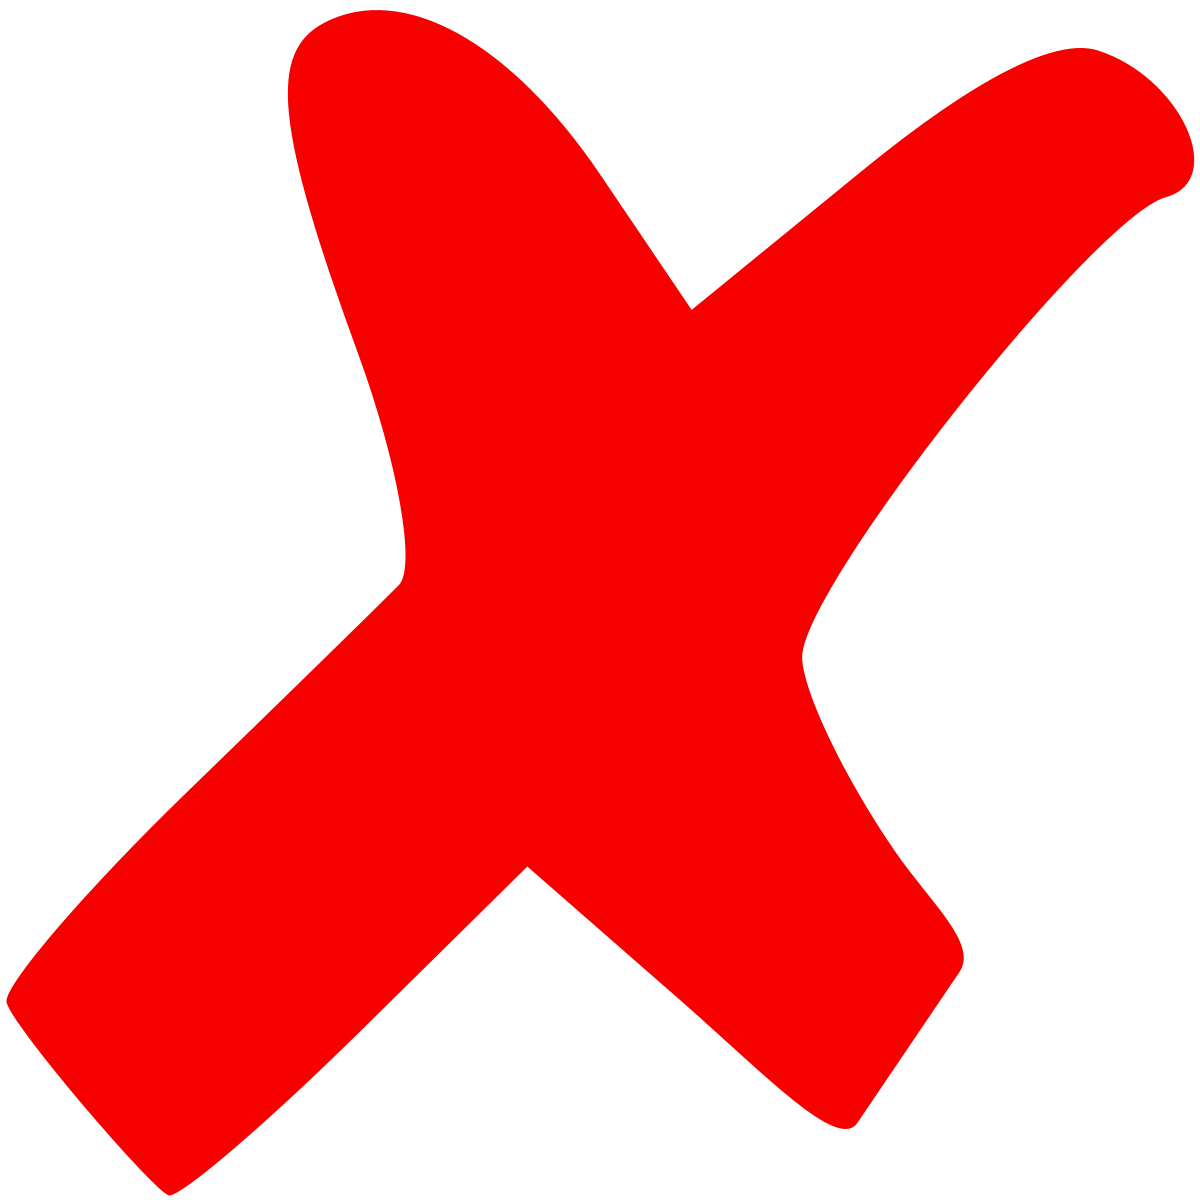 1200px-Red_x.svg.png